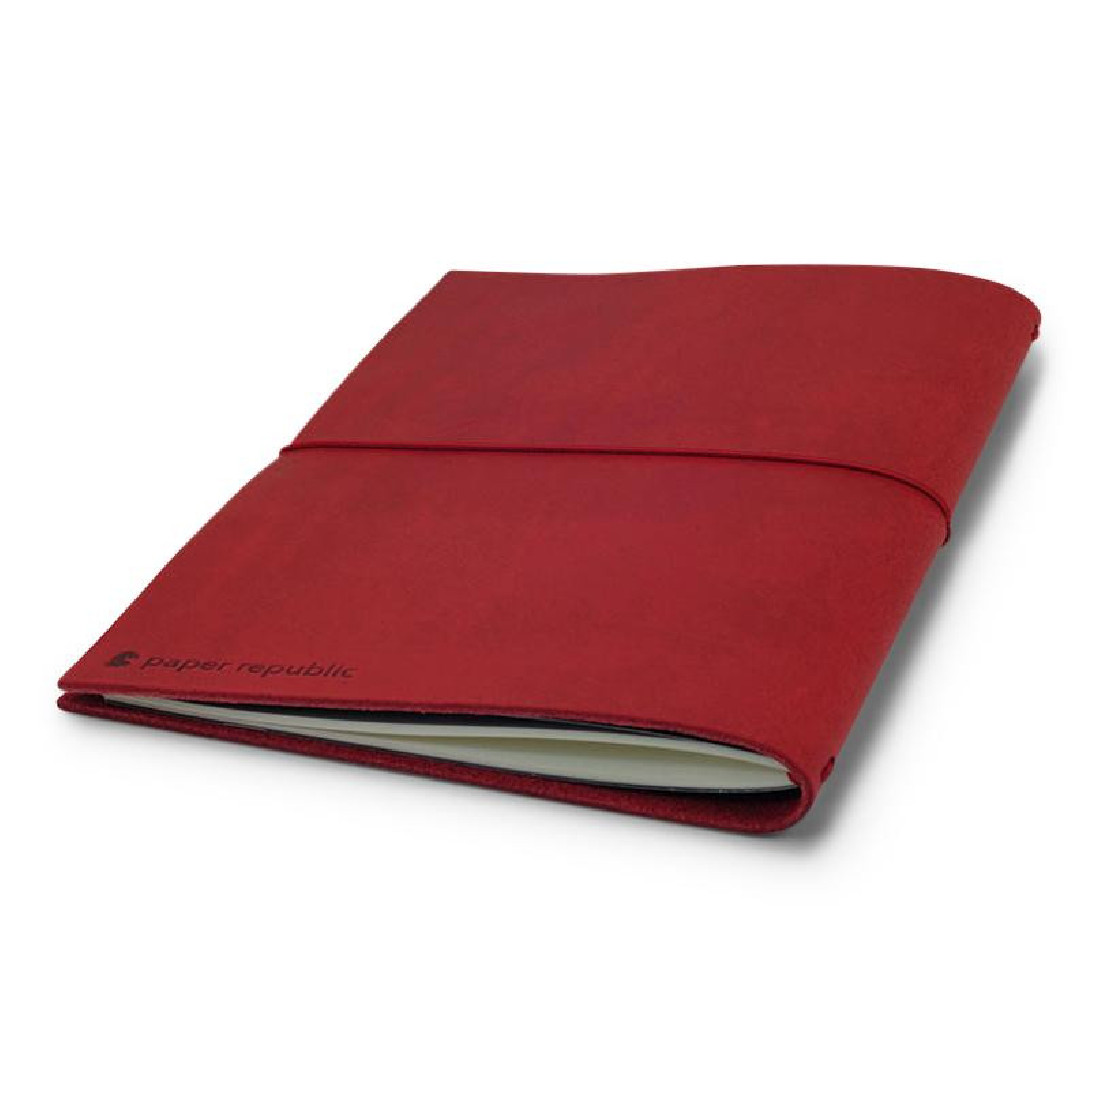 Paper Republic the writers essentials [xl] red leather journal kit